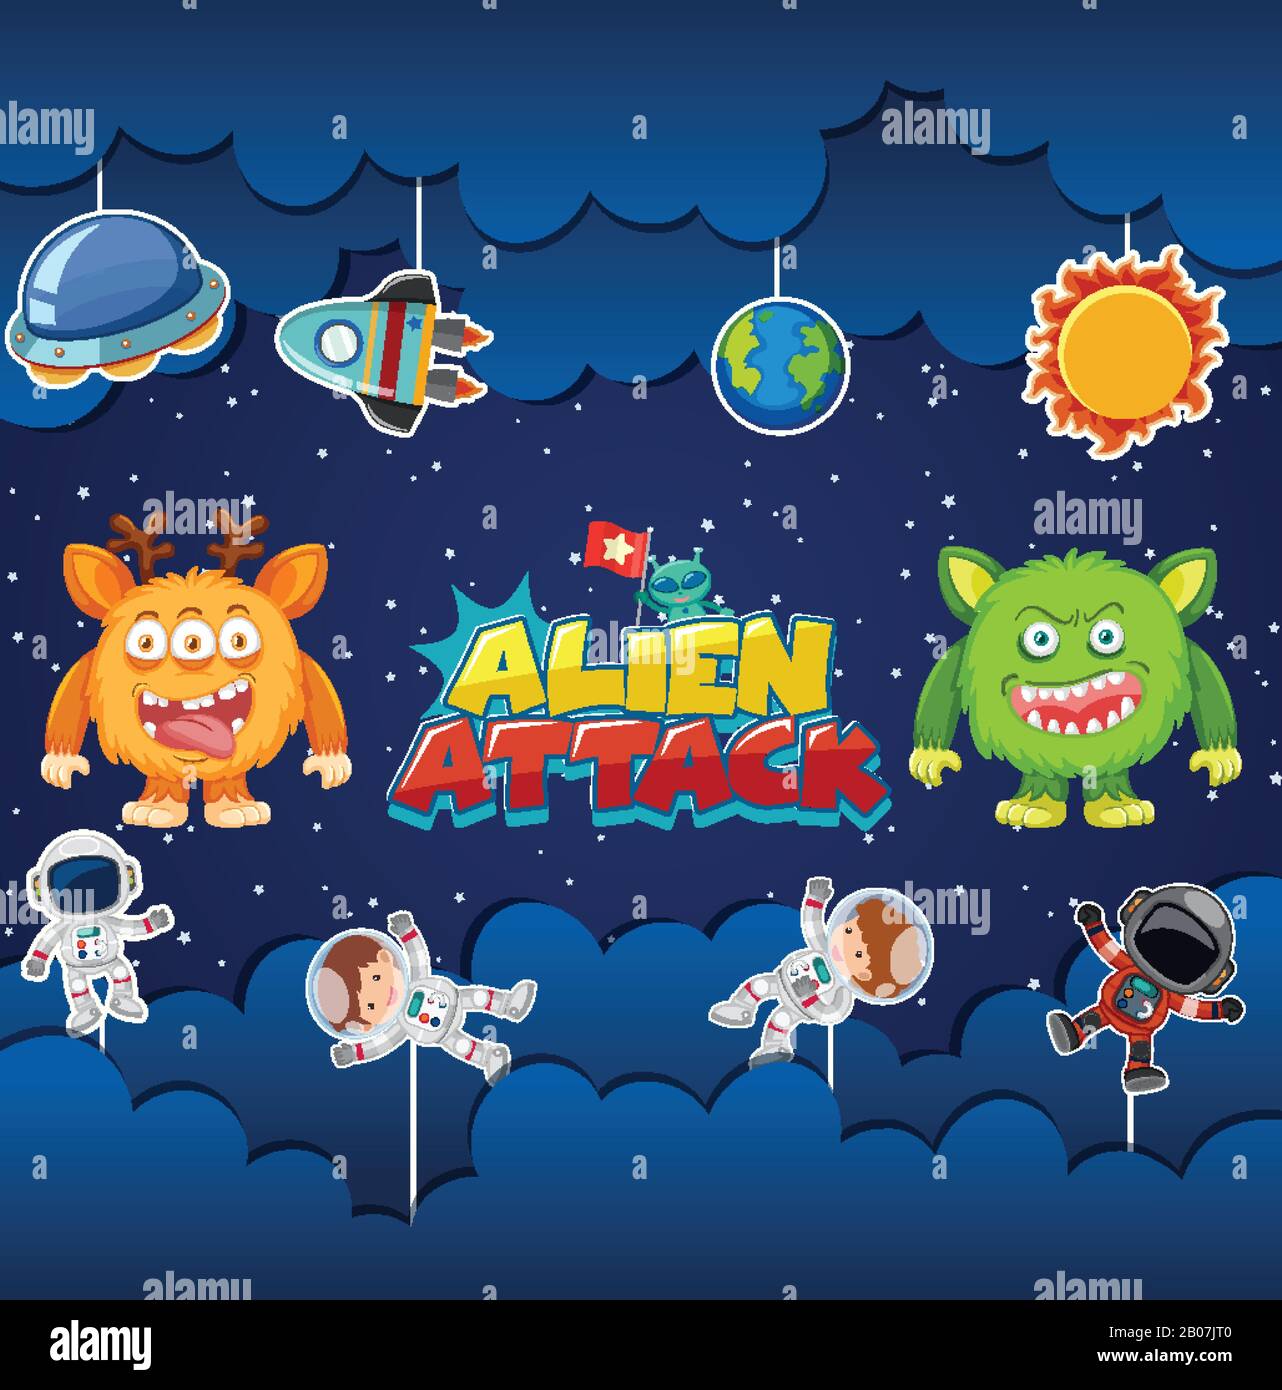 Alien attack poster design with aliens and astronauts illustration Stock  Vector Image & Art - Alamy